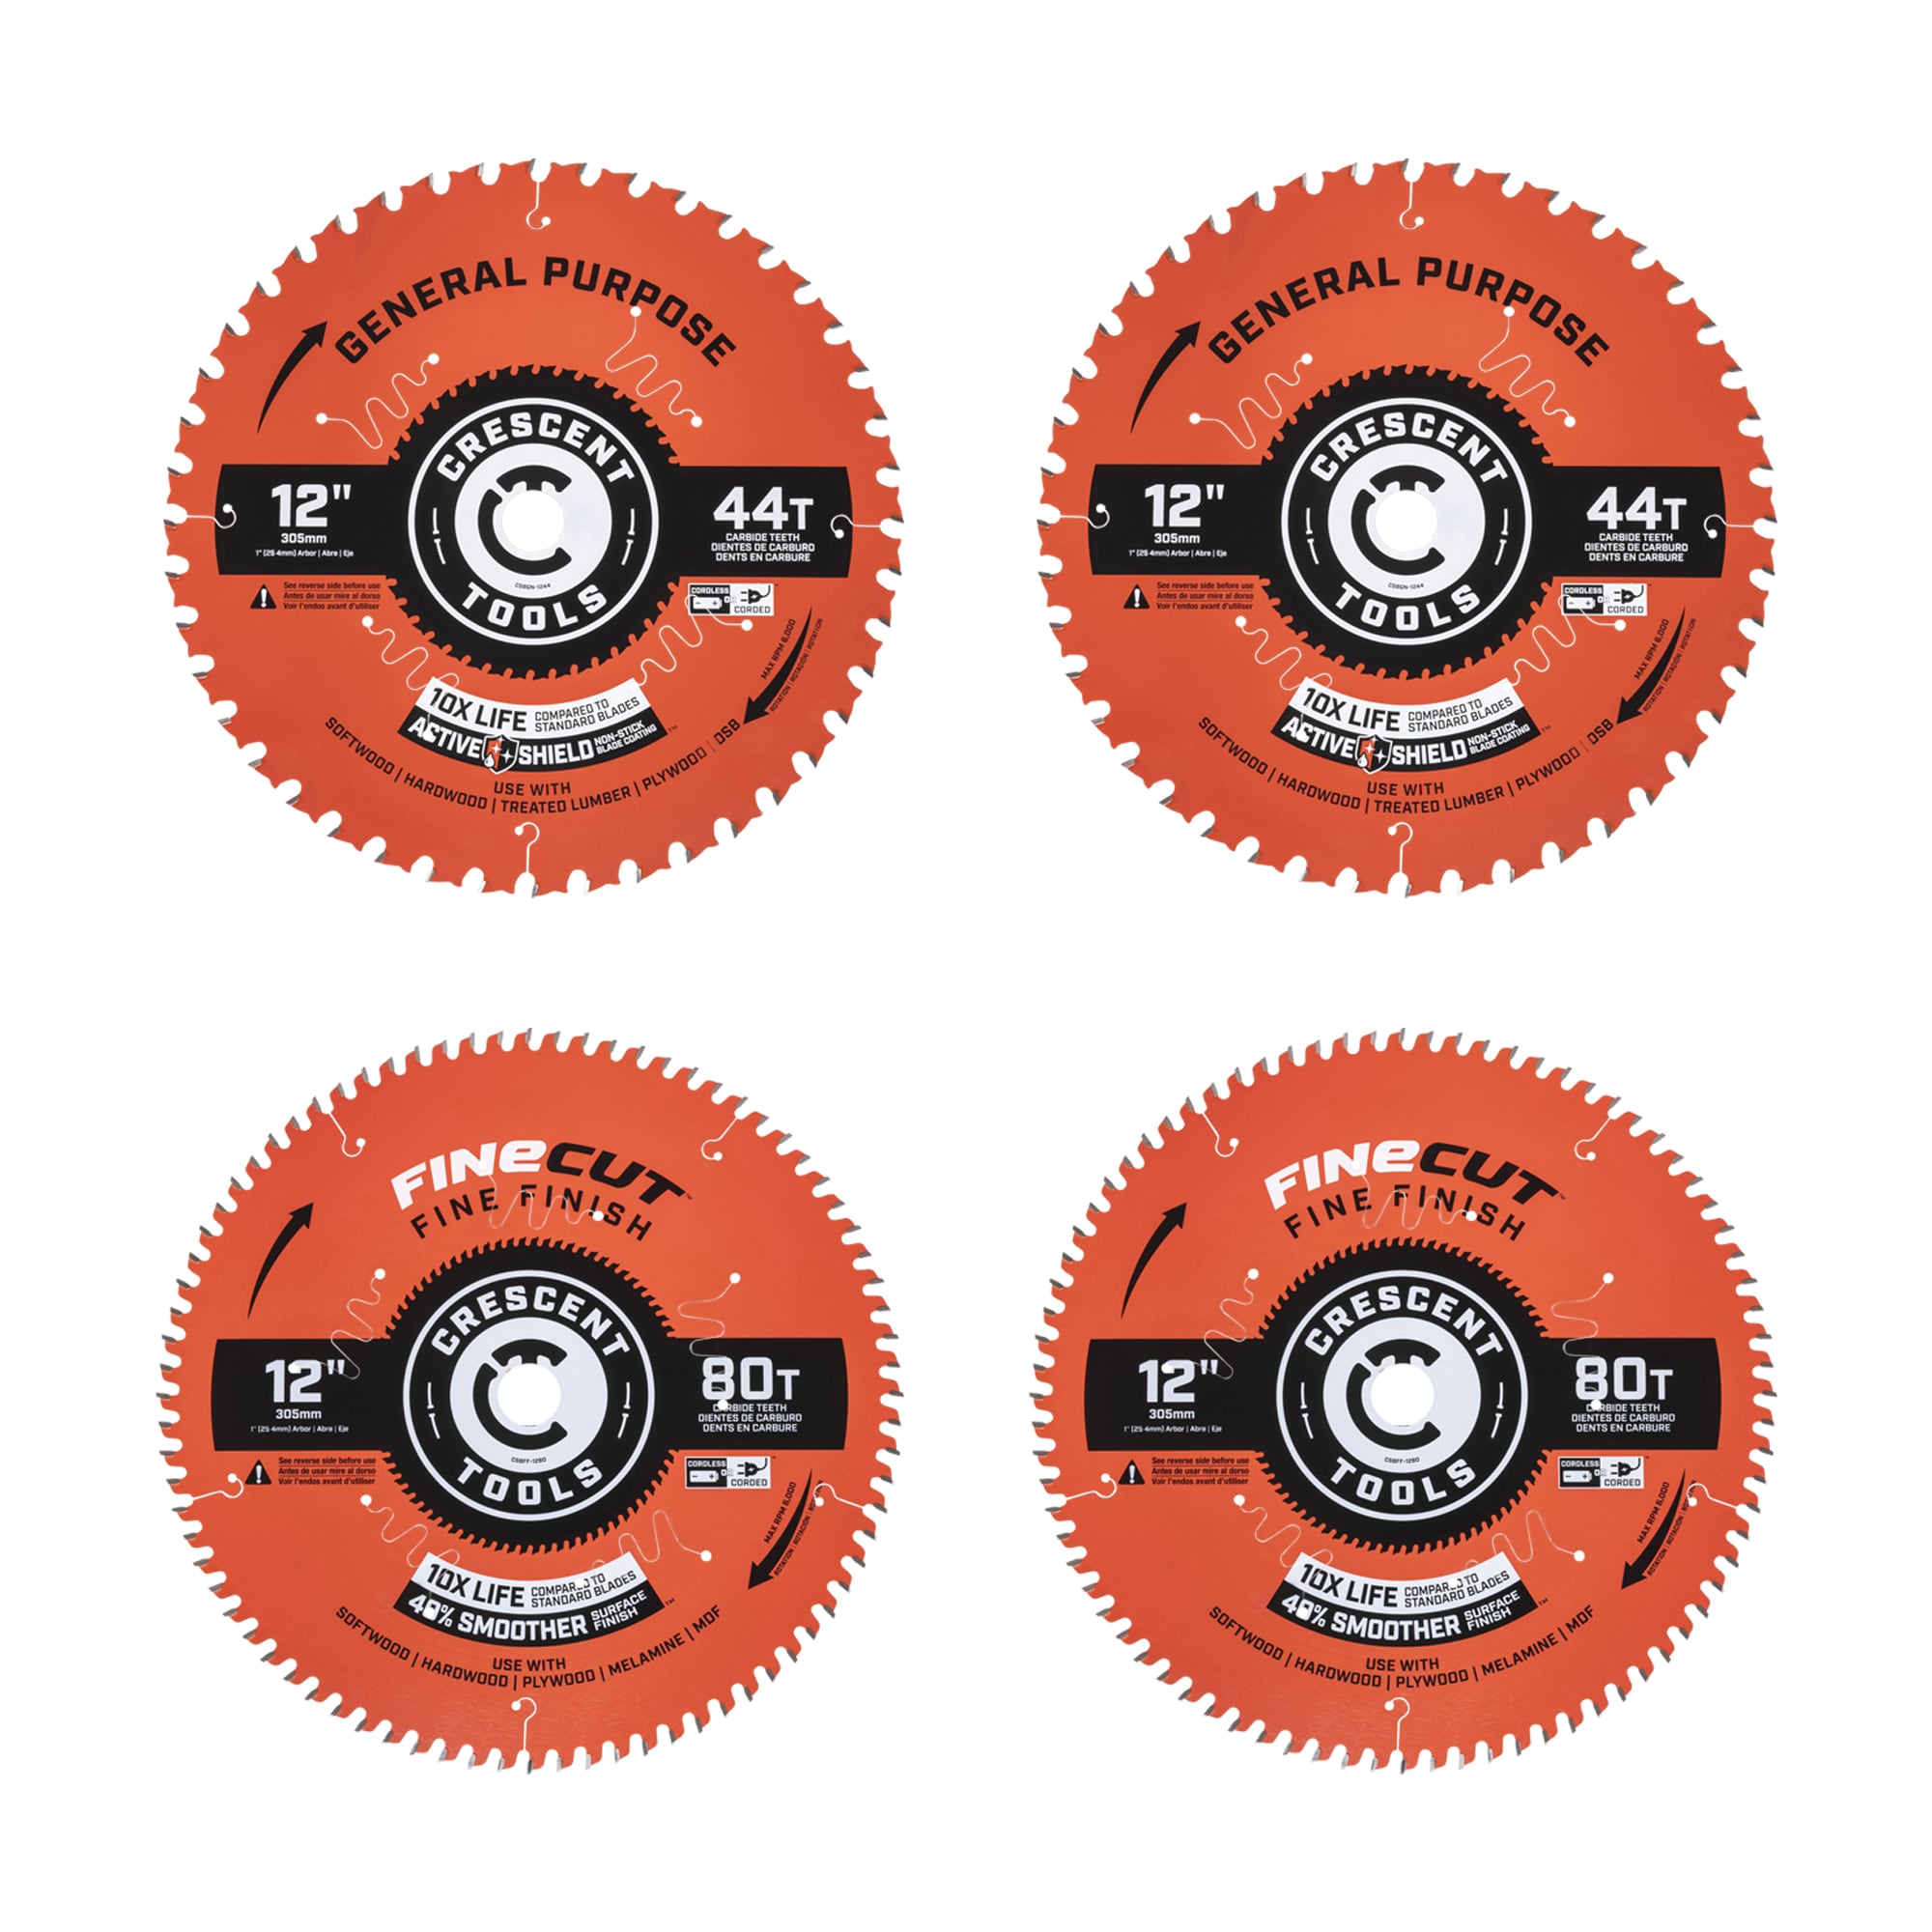 Crescent General Purpose 12-in 44T and Fine Finish 12-in 80T Carbide Circular Saw Blade Contractor Bundle